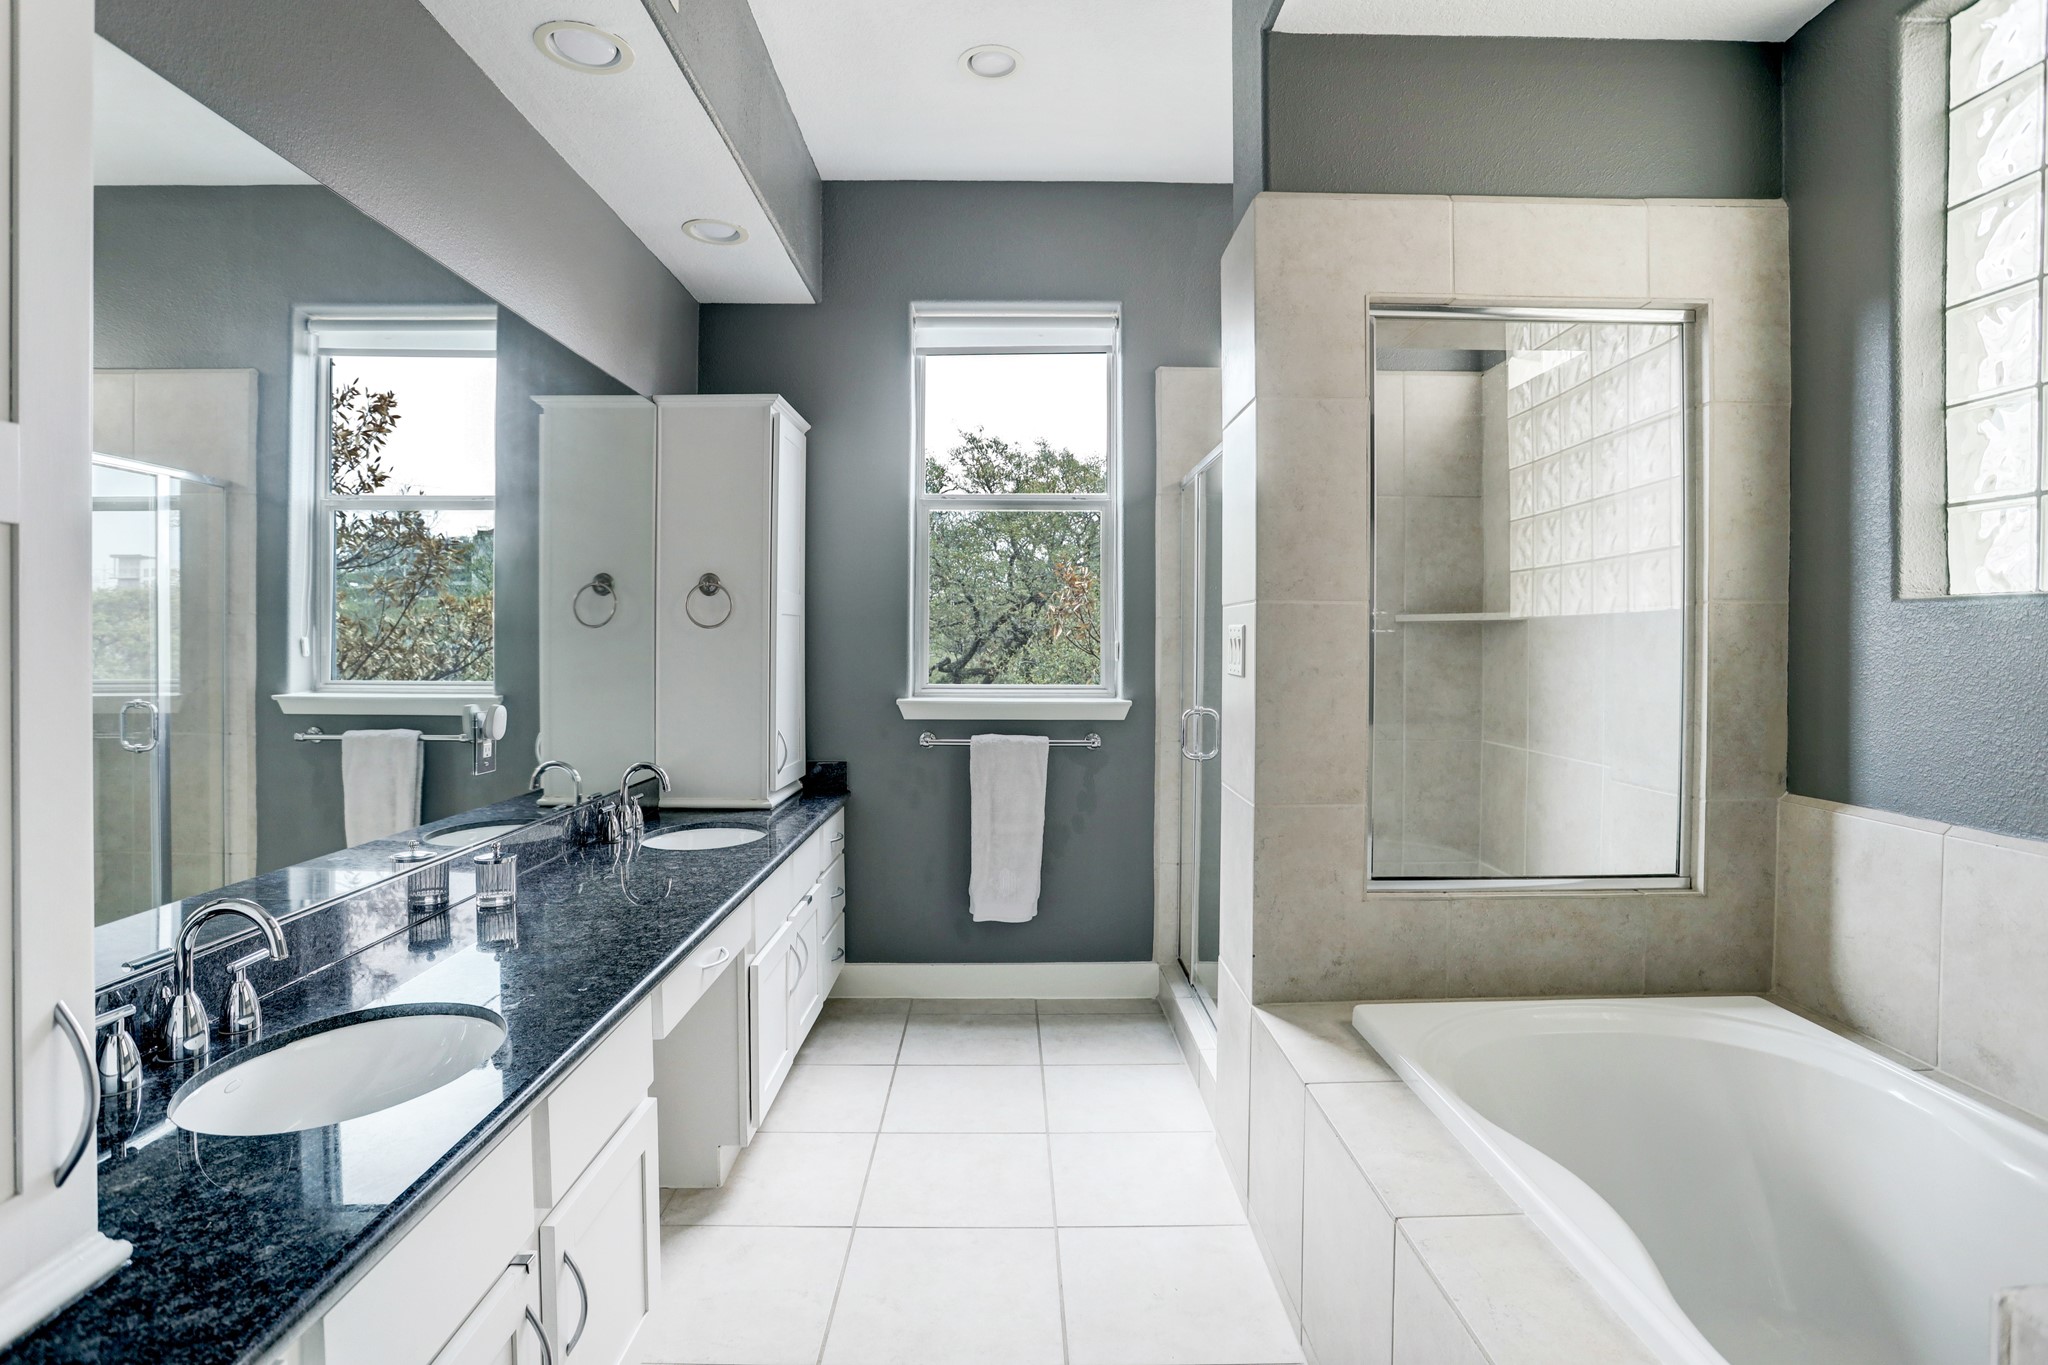 The primary bathroom has double sinks and a vanity, large soaking tub and a large walk-in shower.